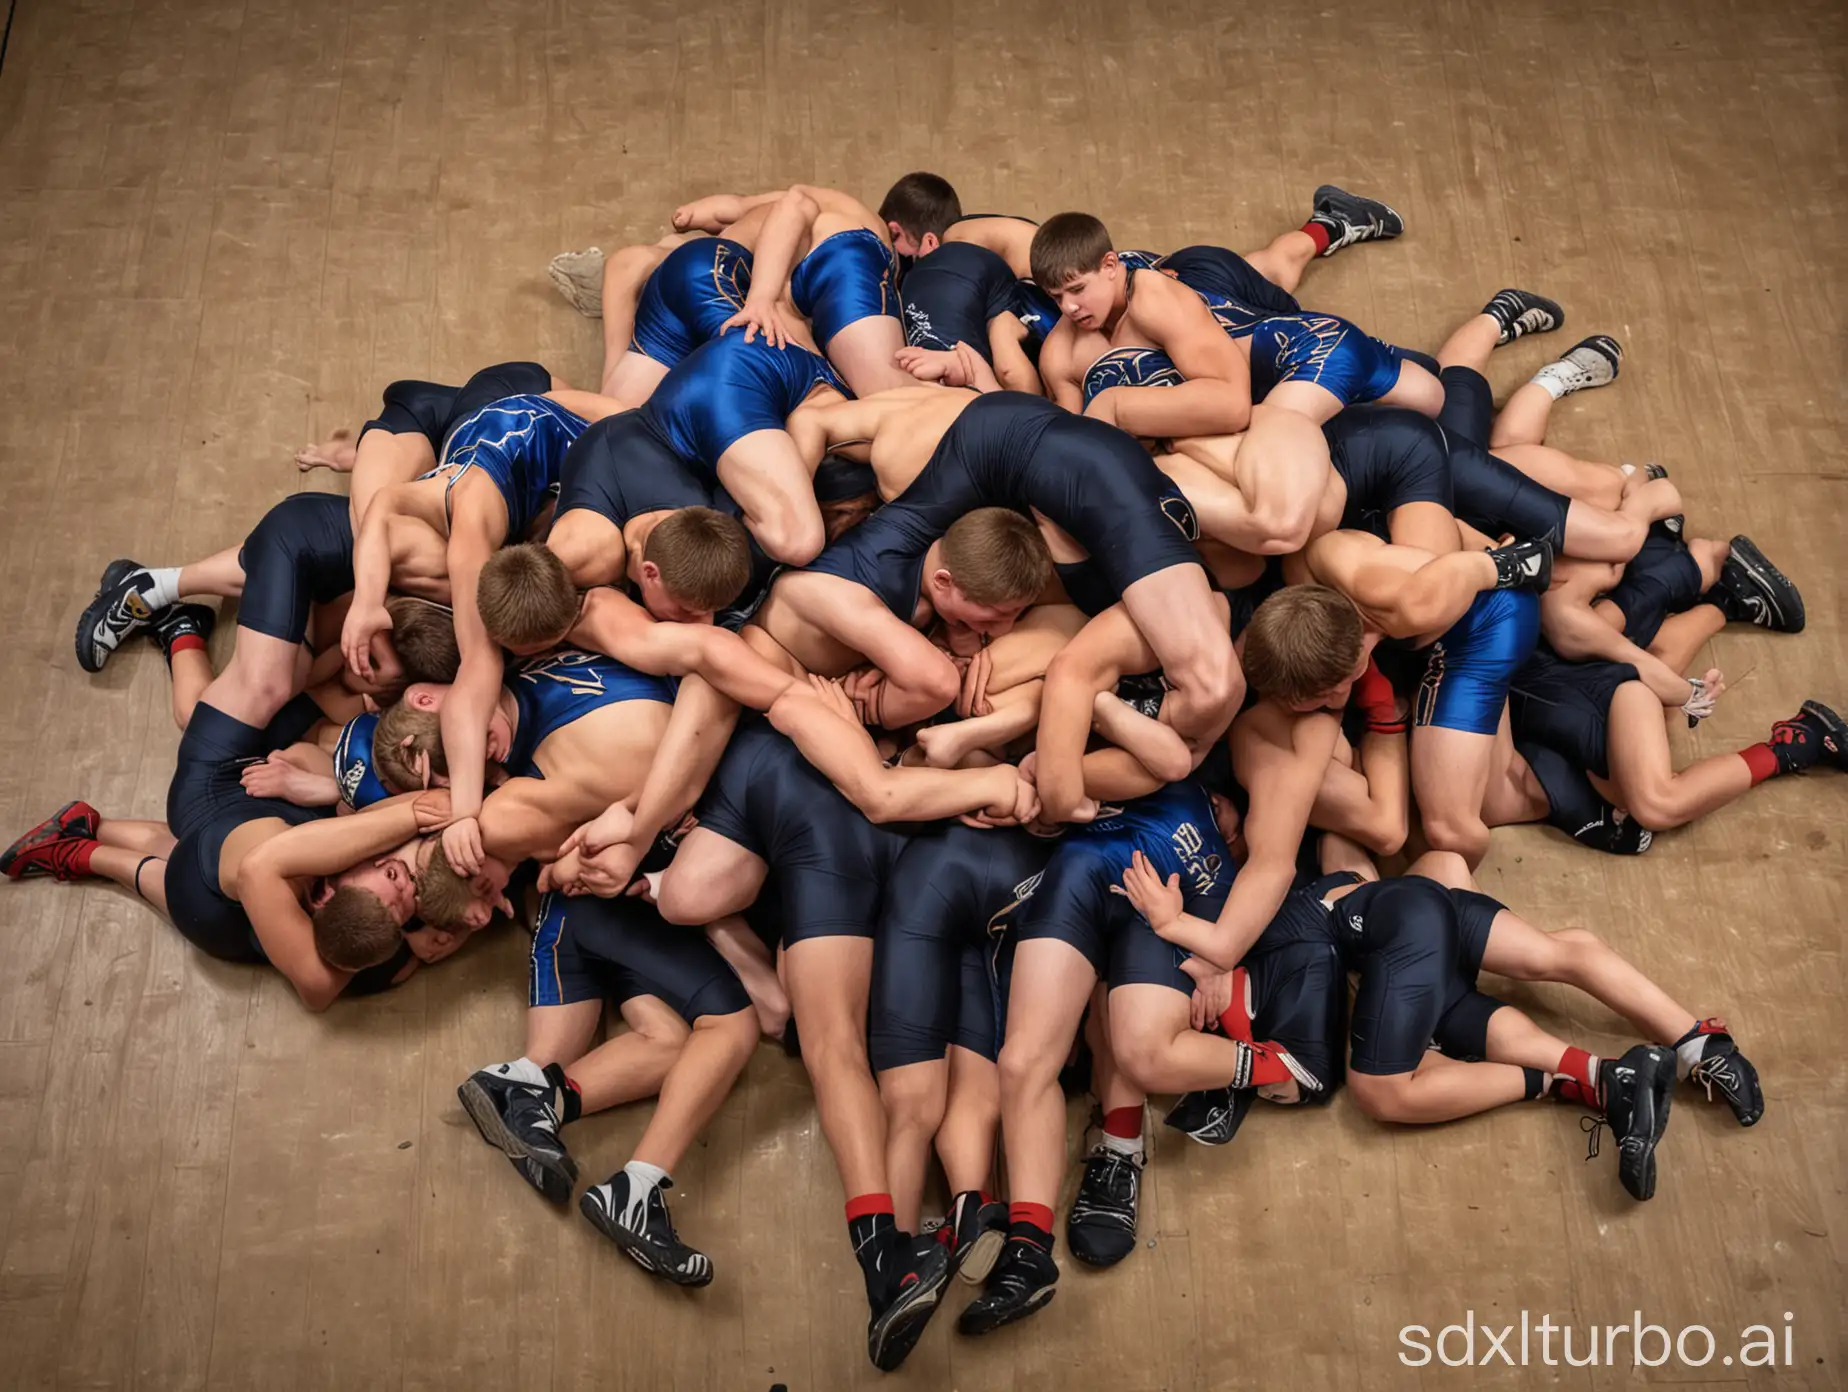 large pile of 14 year old athletic muscular wrestling boys piling up on the floor